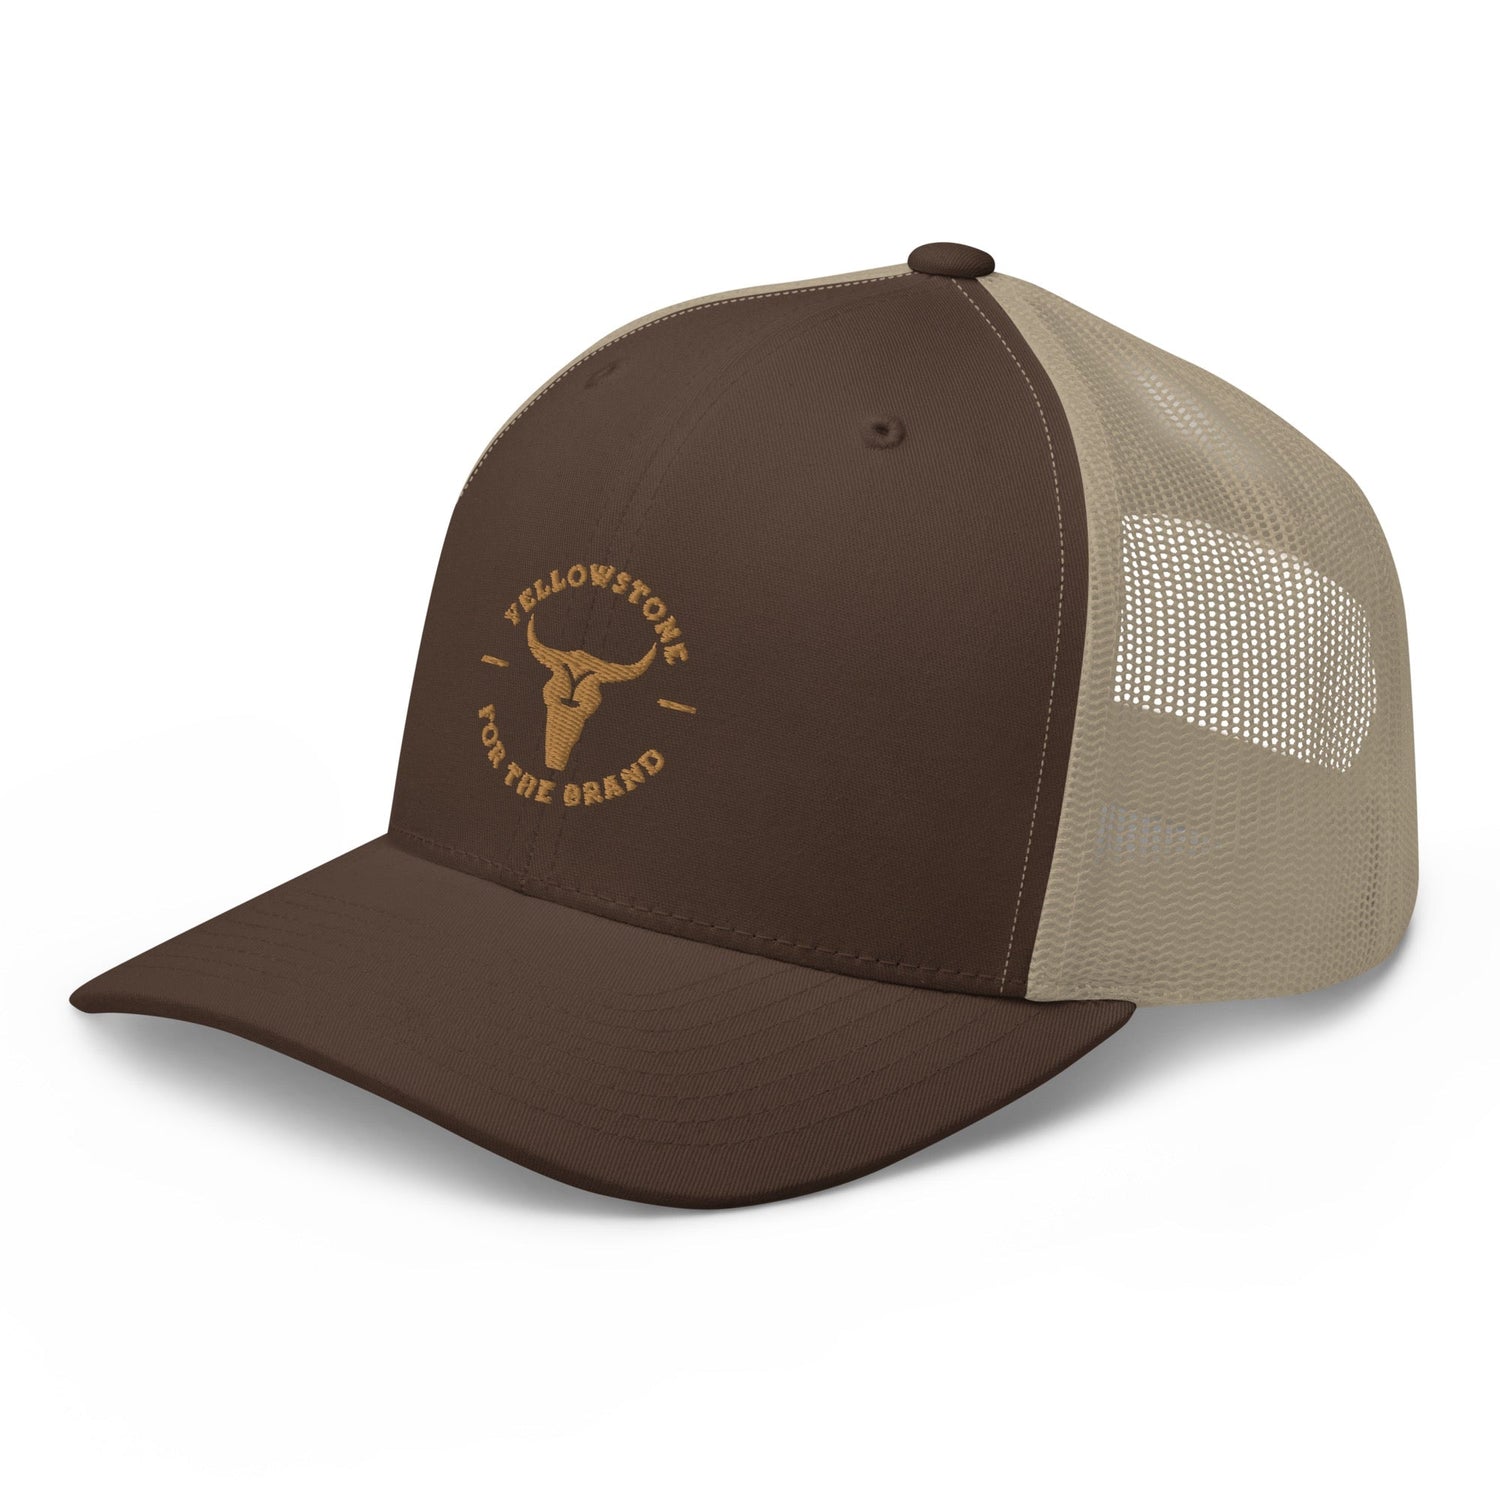 Yellowstone For the Brand Trucker Hat - Paramount Shop